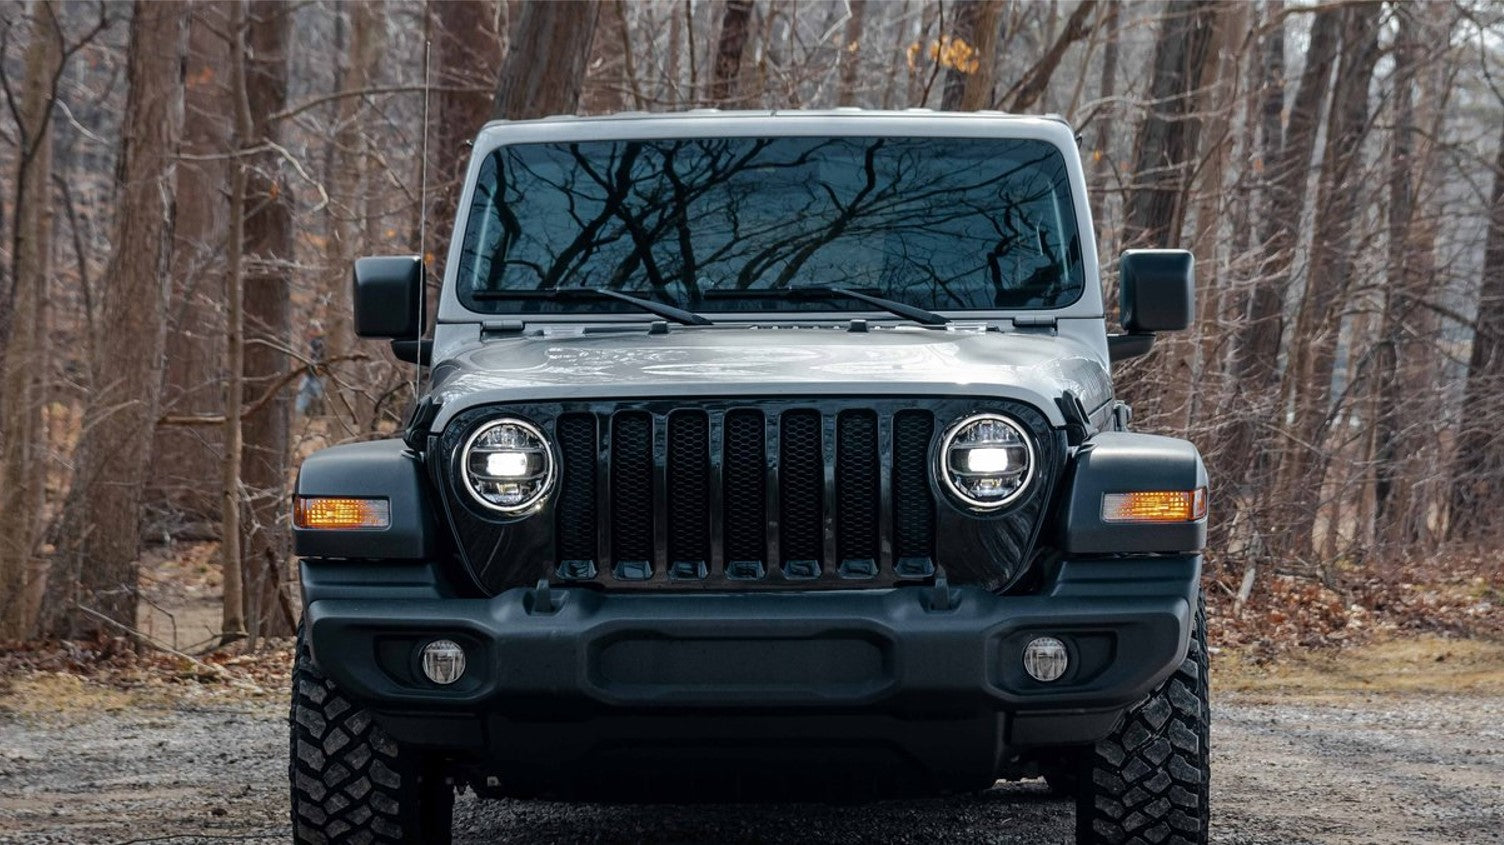 Jeep Aftermarket Parts | Shop for Jeep Gladiator Parts, Jeep